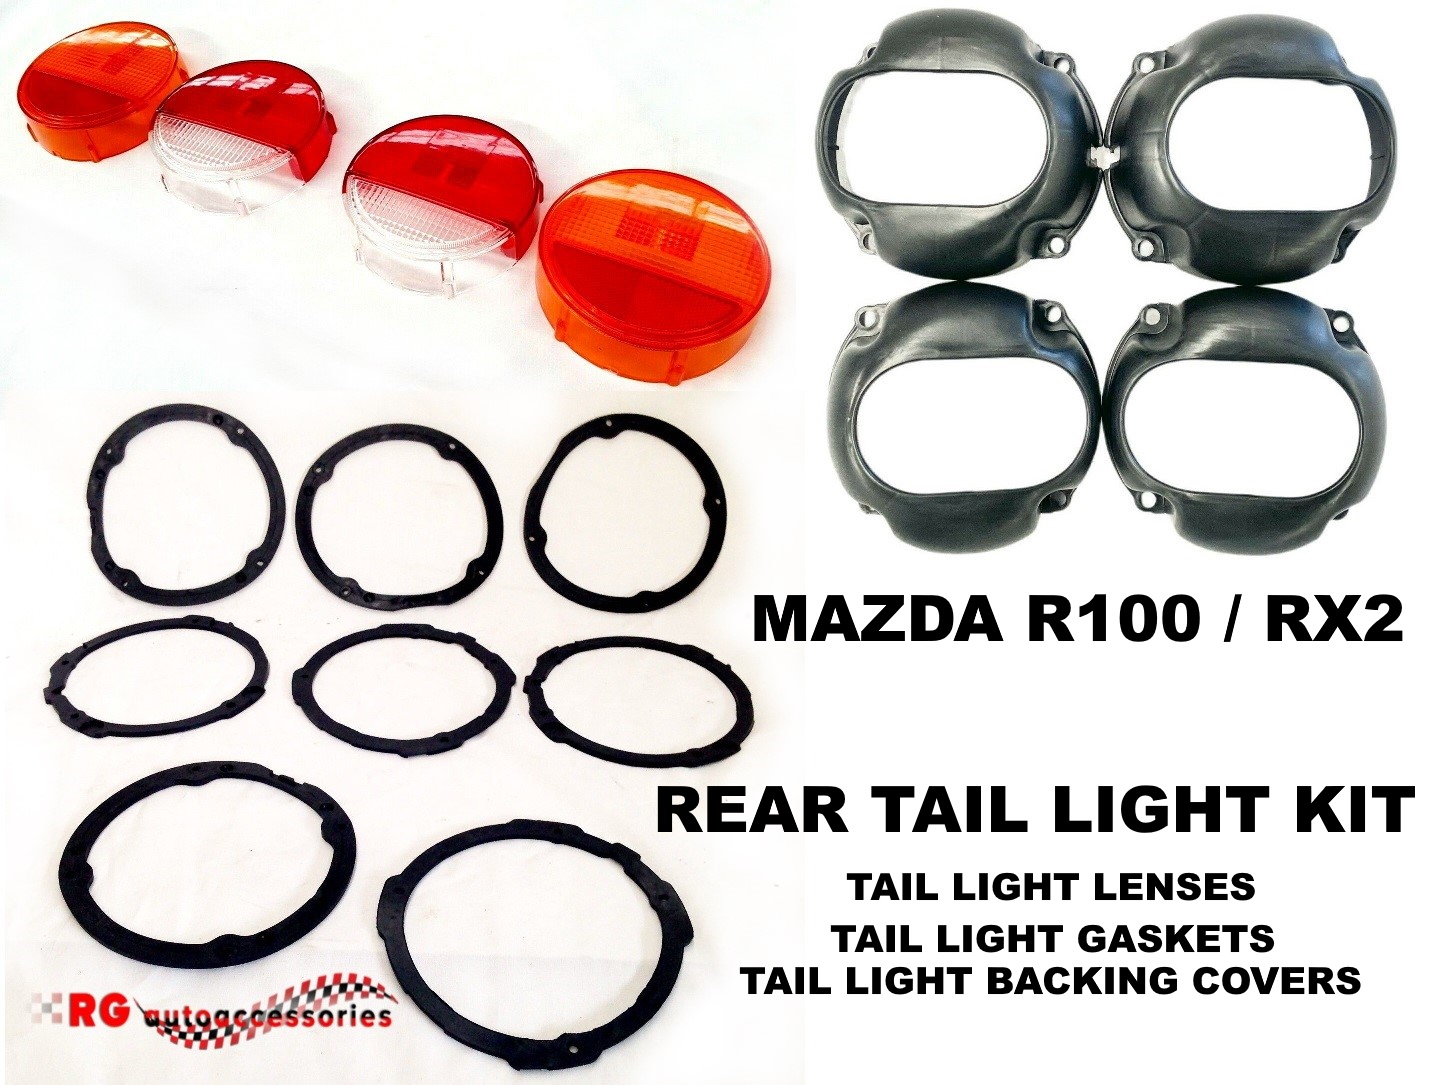 MAZDA M10A R100 RX2 CAPELLA REAR TAIL LIGHT LAMP KIT LENSES – GASKETS AND BACKING COVERS WITH FREE FREIGHT